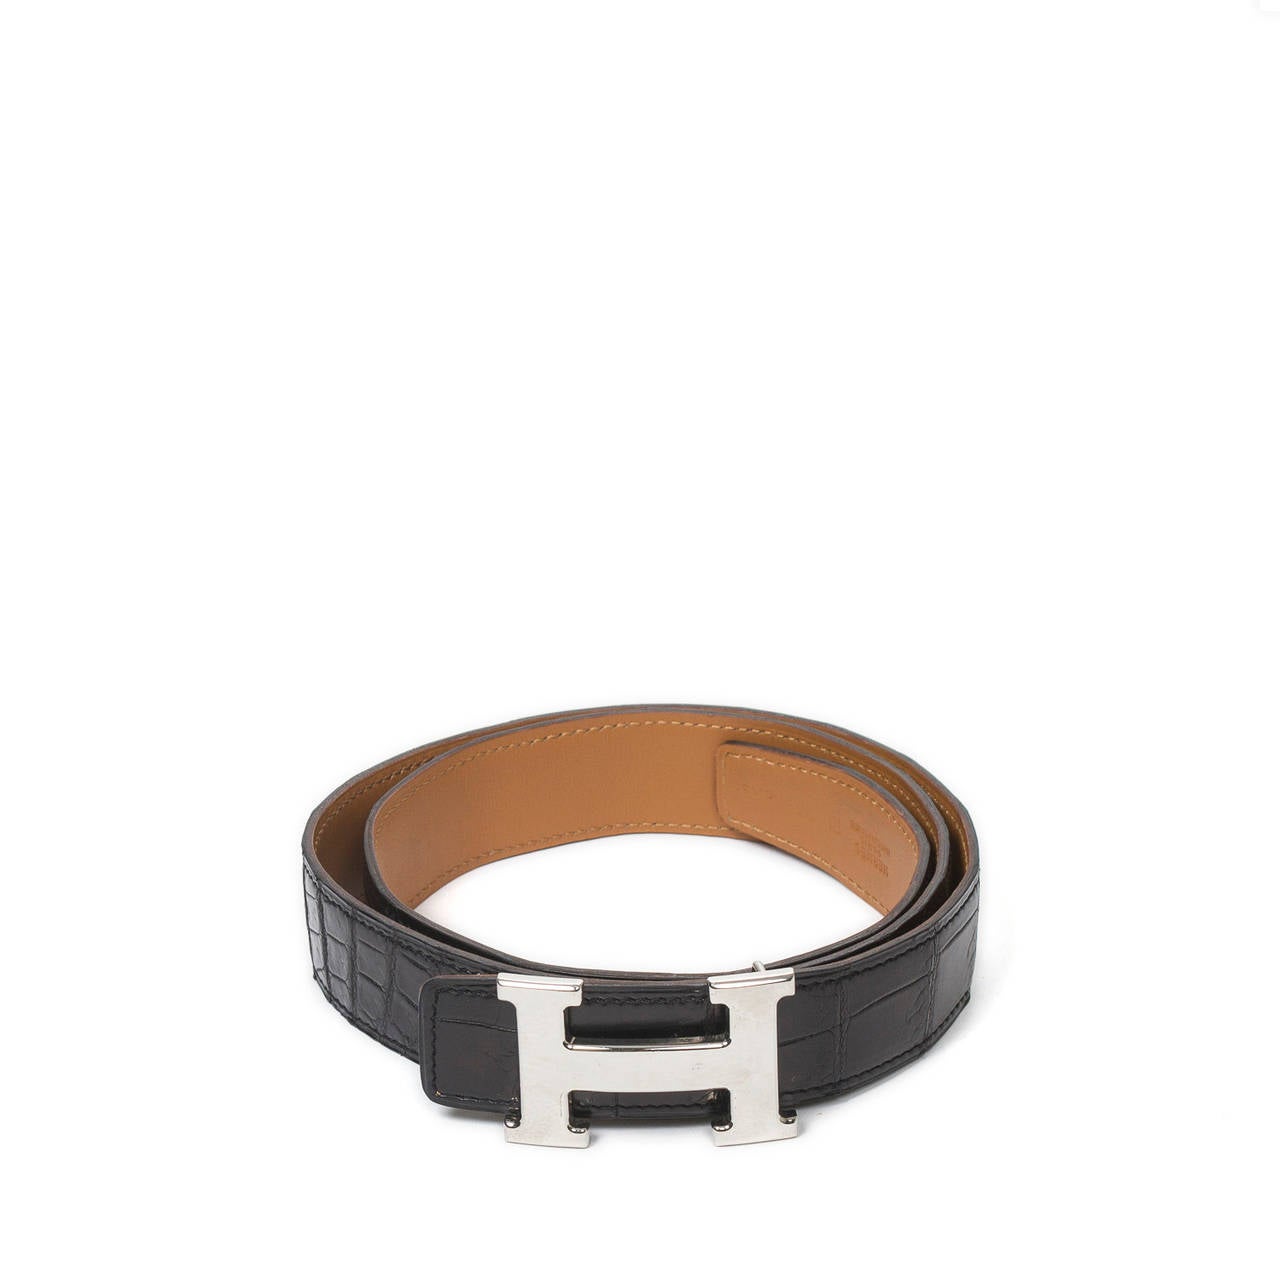 Reversible Constance H belt 32mm in silver tone with black matte porosus crocodile and tan leather strap, size 90. Stamp j in square (2006). Slight scratches on the H buckle, excellent condition.